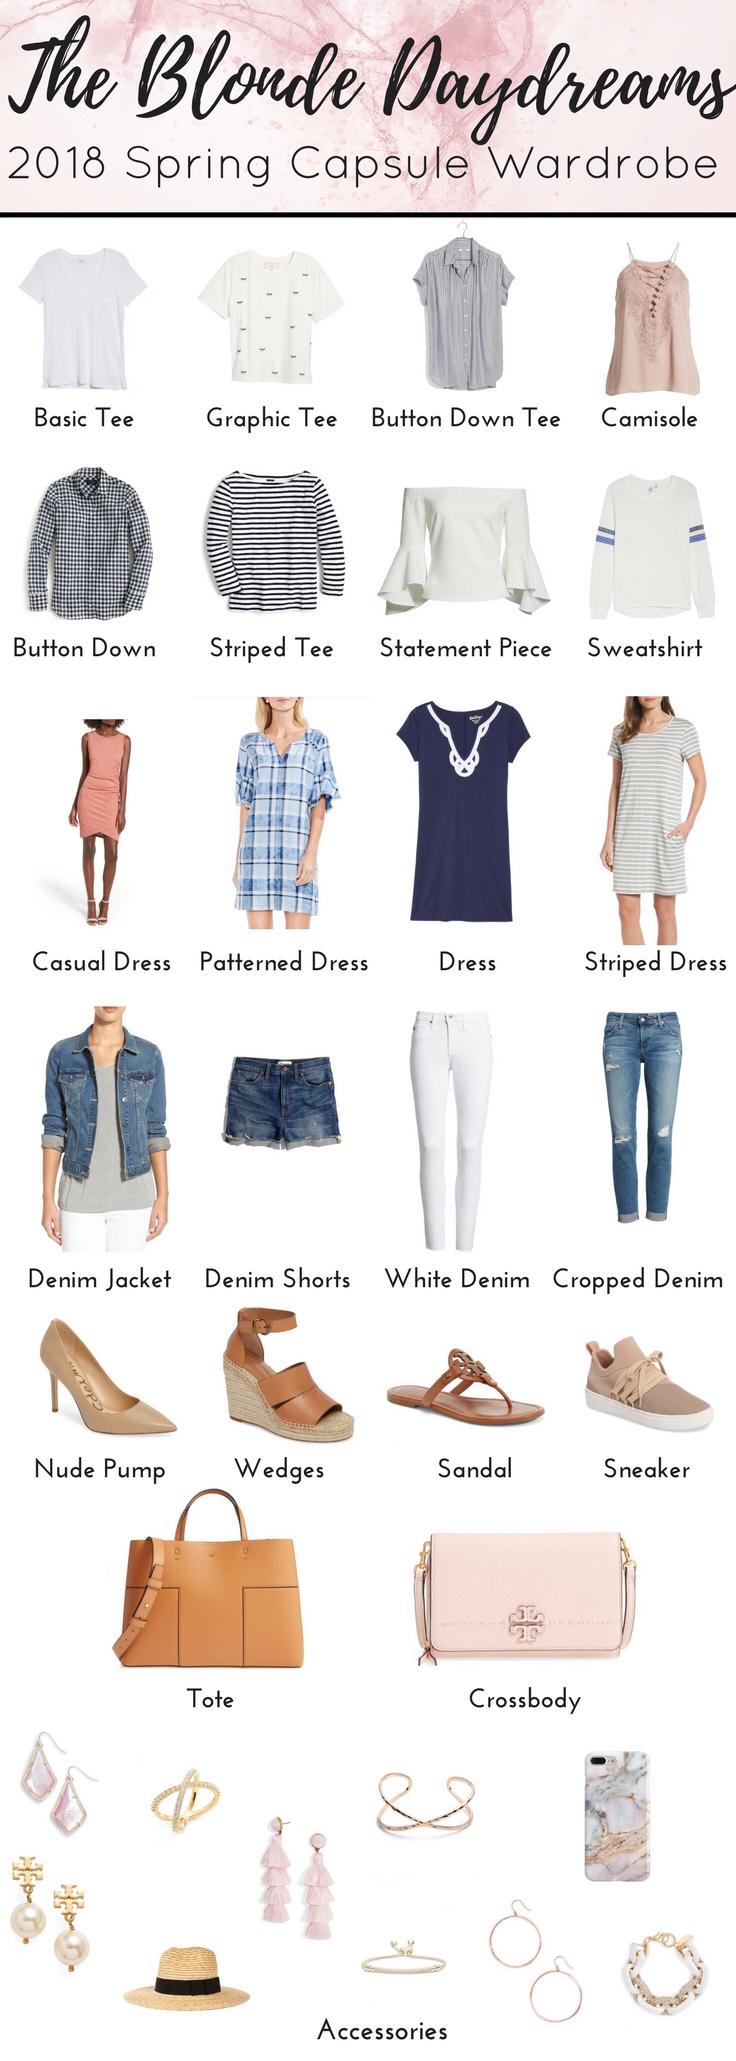 spring_capsule_wardrobe_fashion_trends_shoes_clothes_dresses_accessories_purse